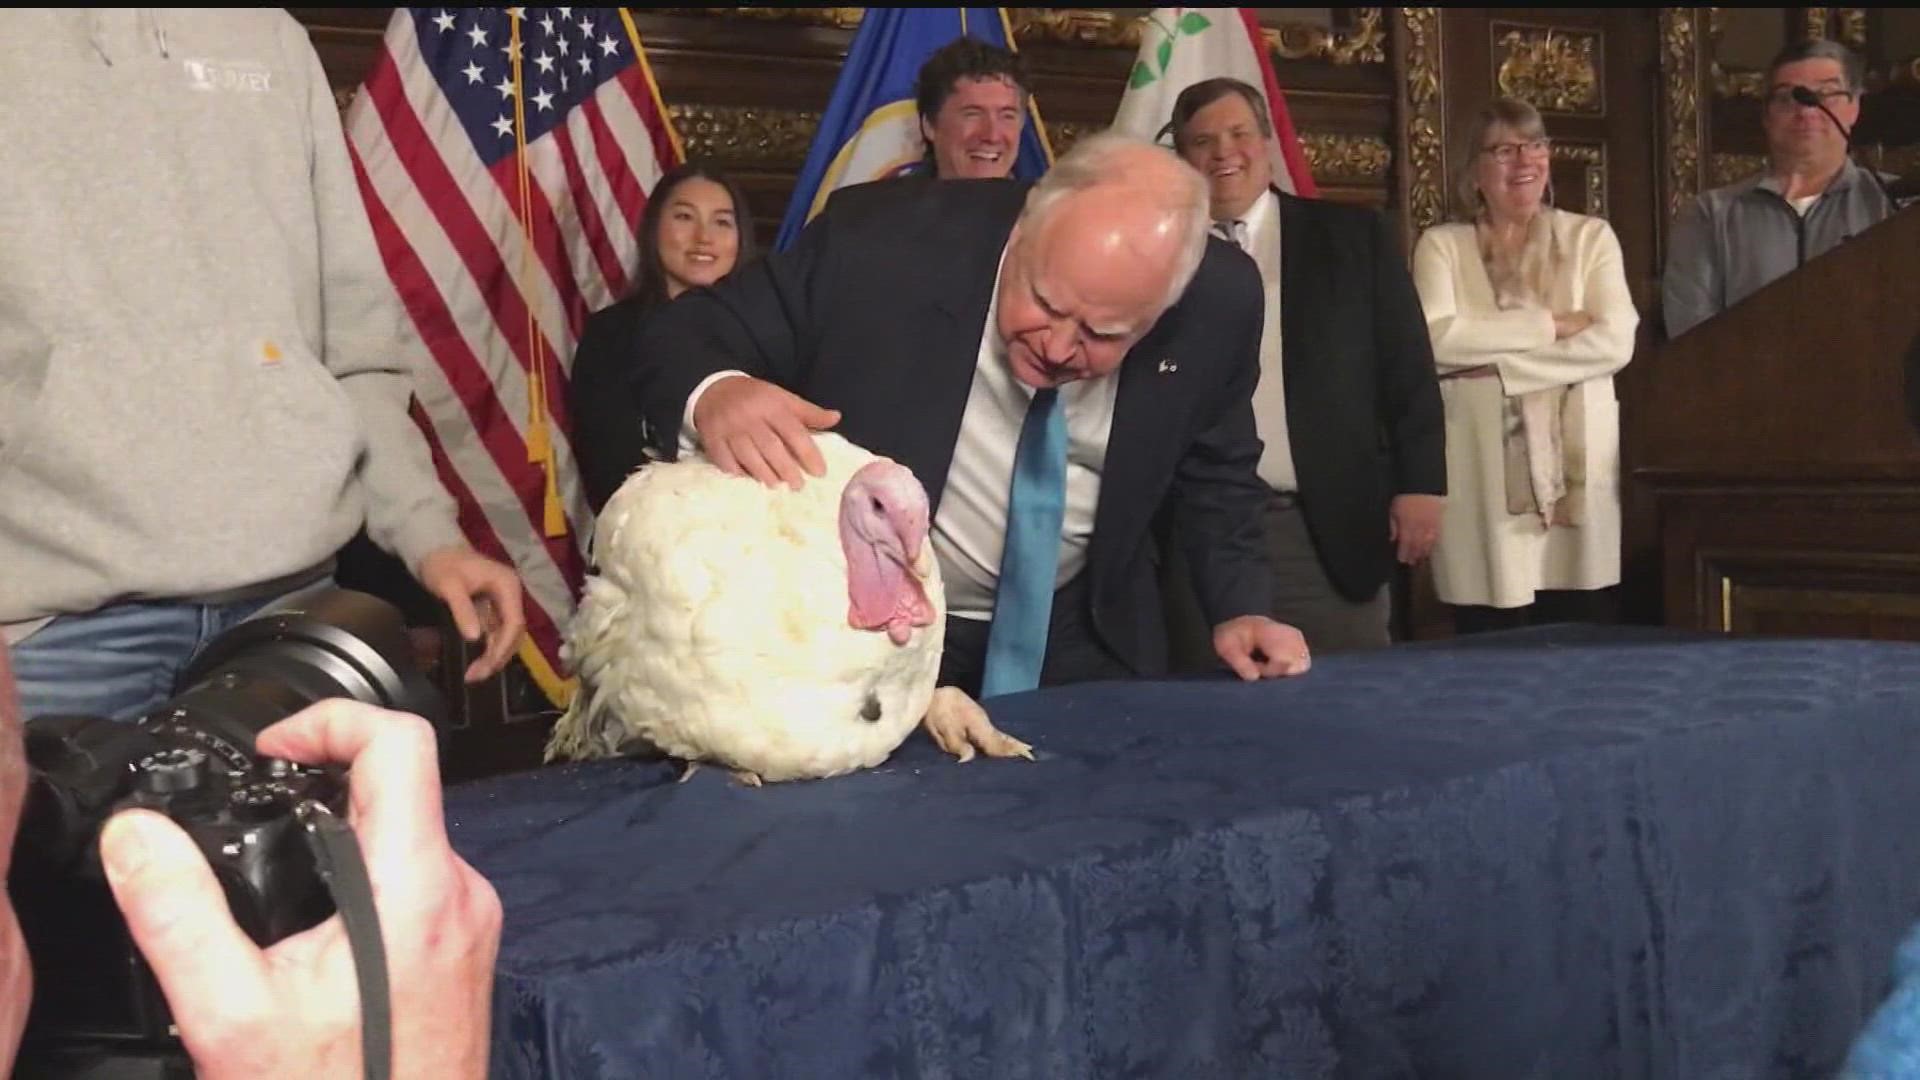 On Tuesday, Gov. Tim Walz continued the long-standing tradition of throwing the spotlight on Minnesota's nation-leading turkey industry ahead of Thanksgiving.